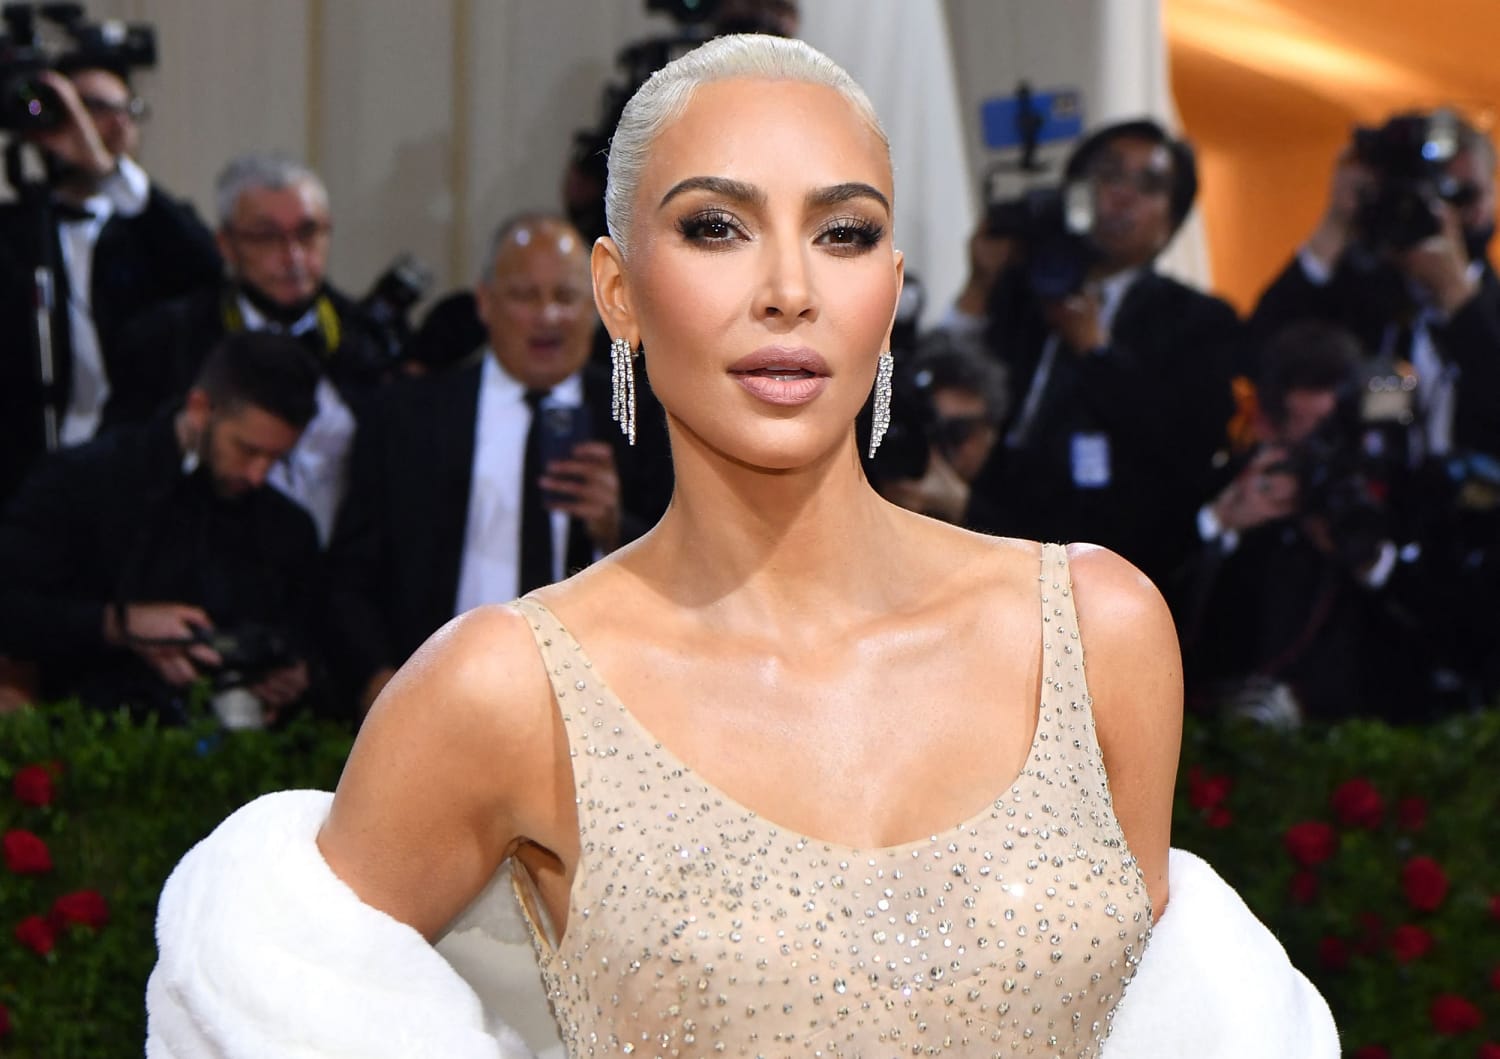 Kim Kardashian told women to 'get  up and work.' Some people are saying  it's hypocritical.